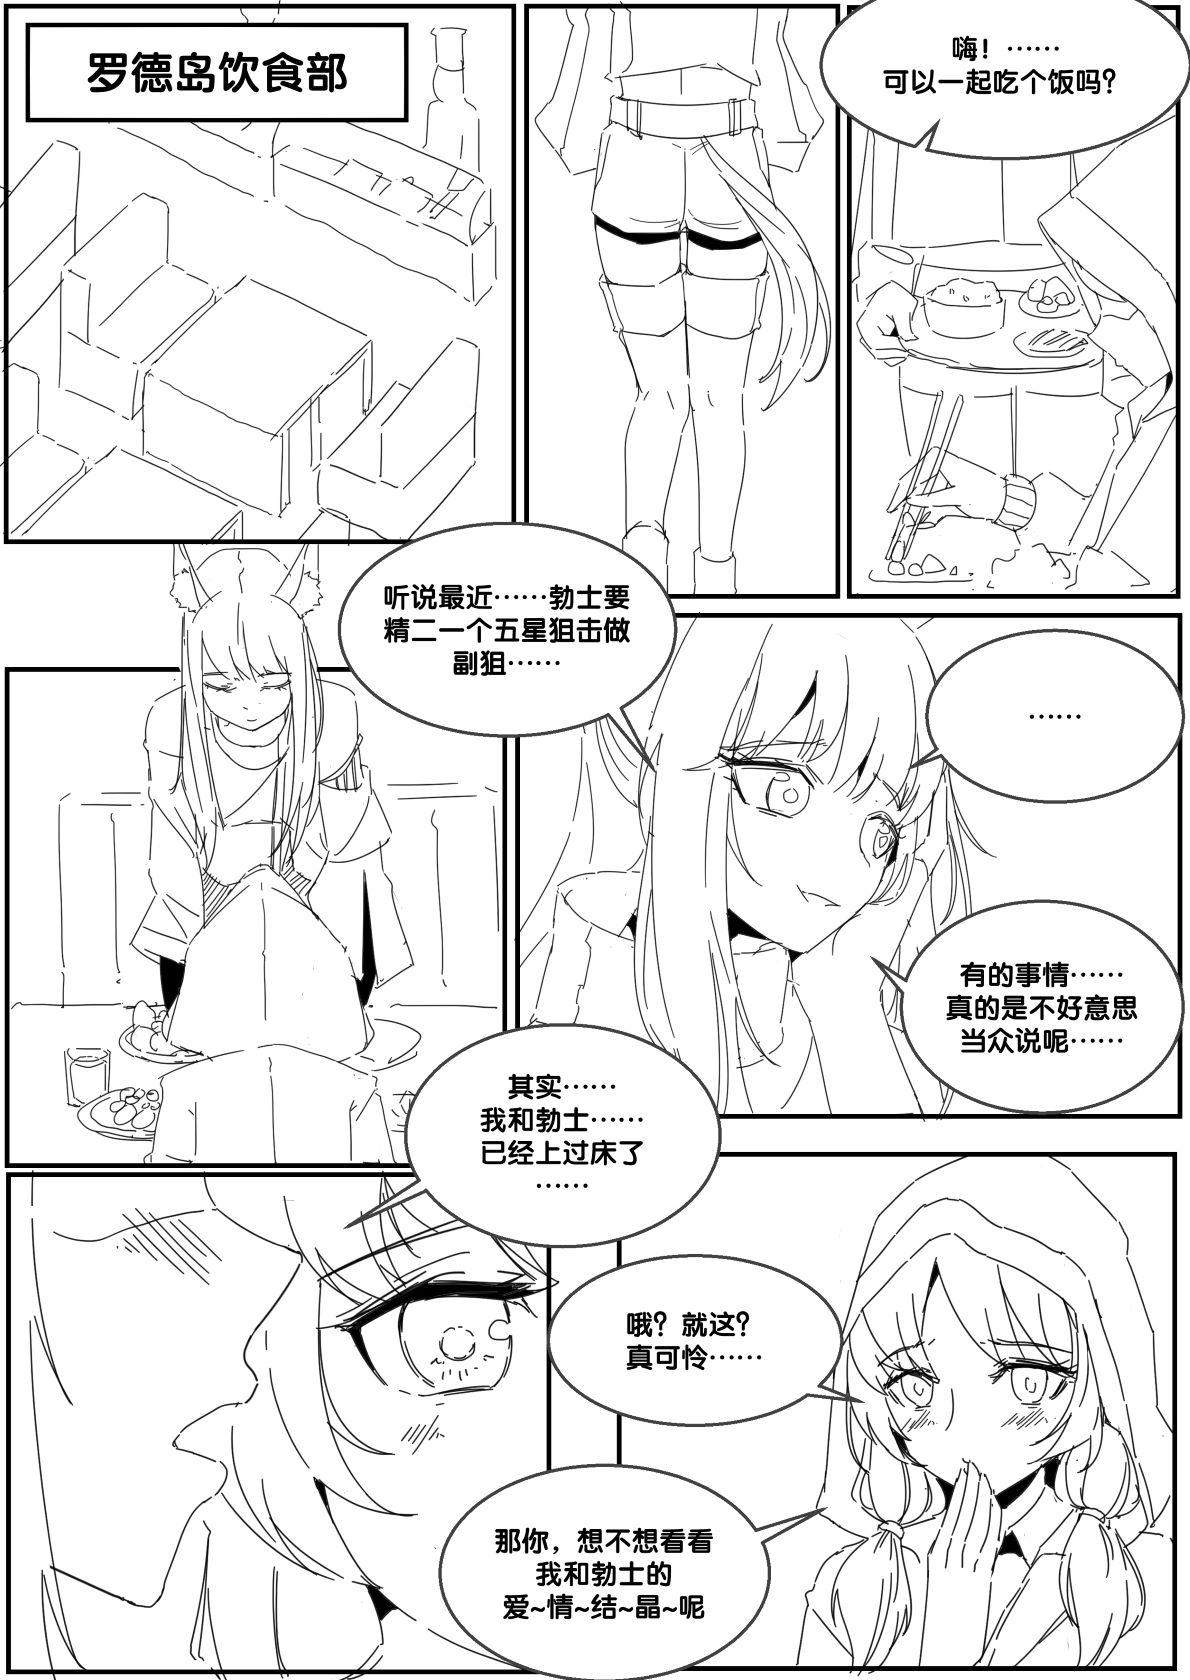 Stepbrother 勃士日常其3 - Arknights Step Fantasy - Page 5